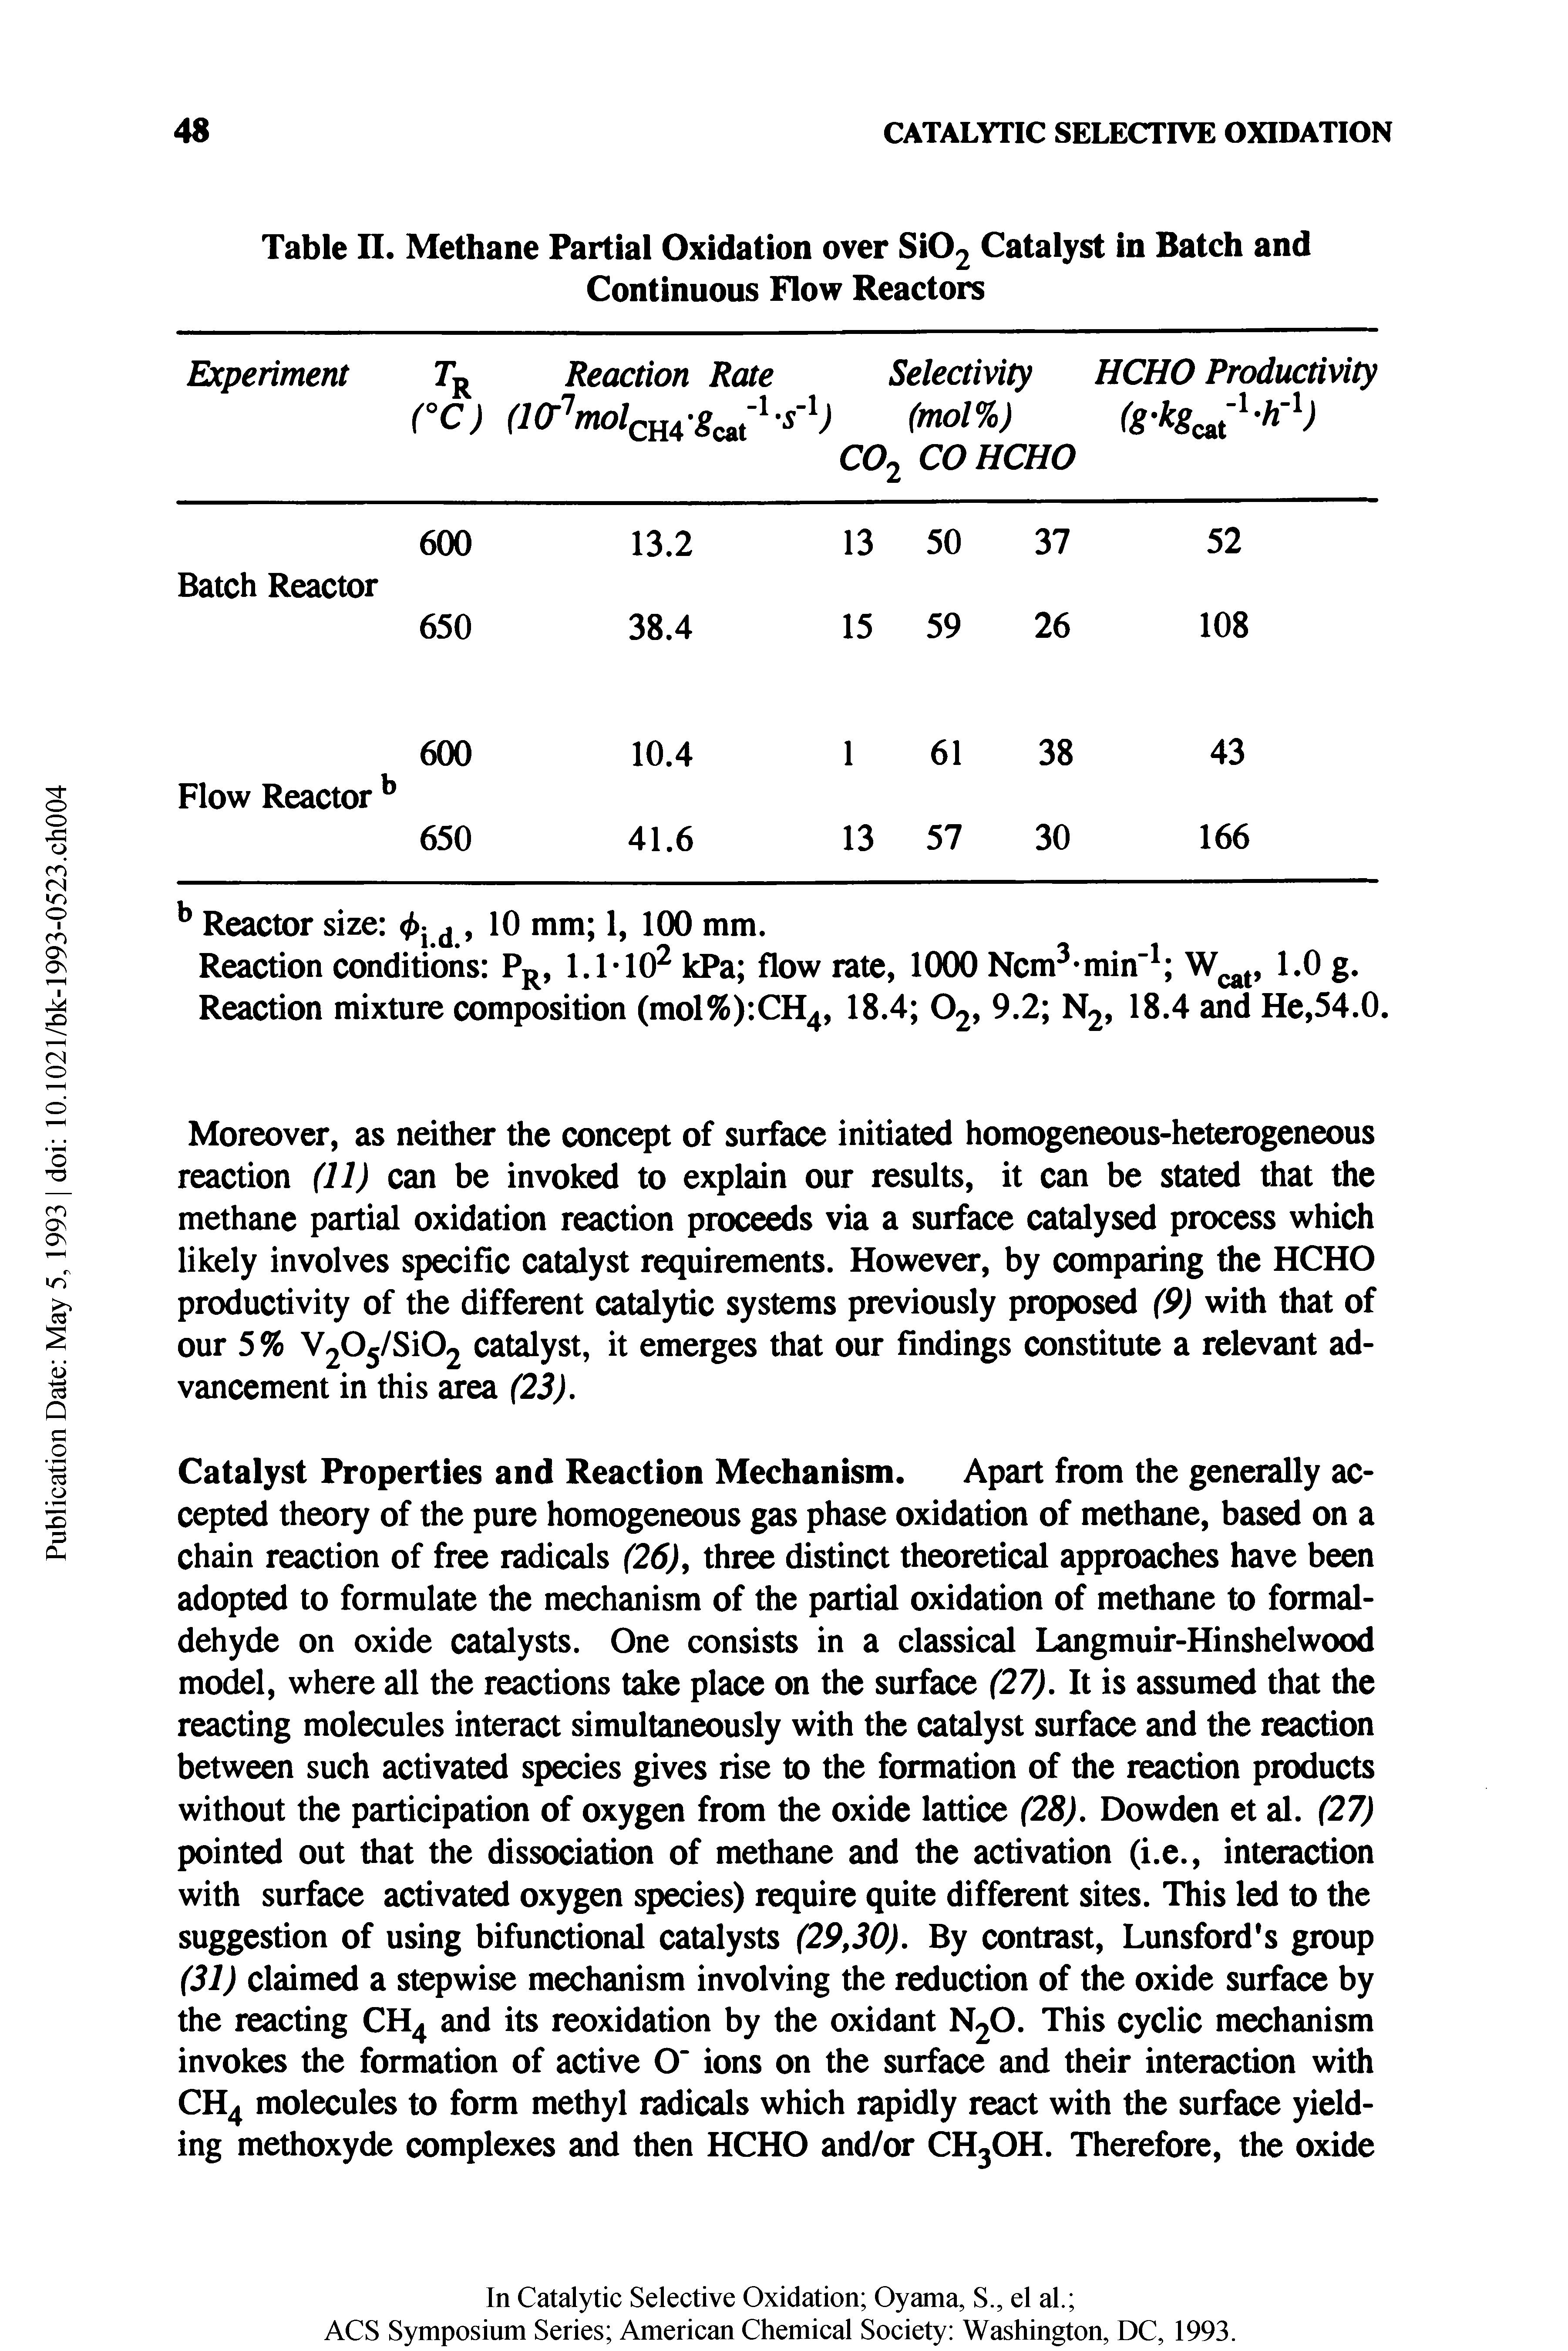 Table II. Methane Partial Oxidation over Si02 Catalyst in Batch and Continuous Flow Reactors...